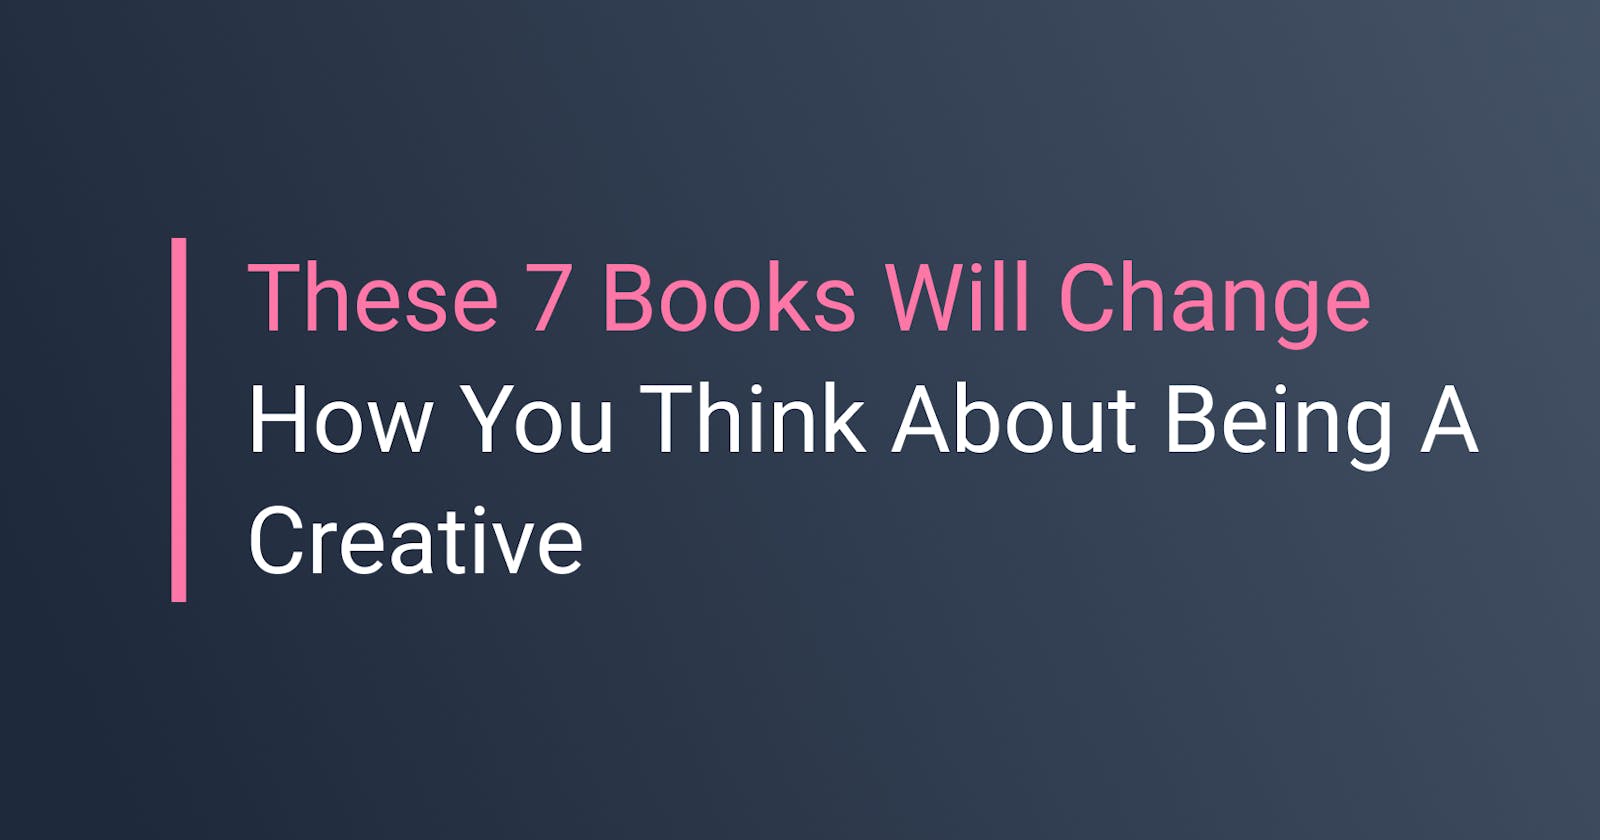 These 7 Books Will Change How You Think About Being A Creative